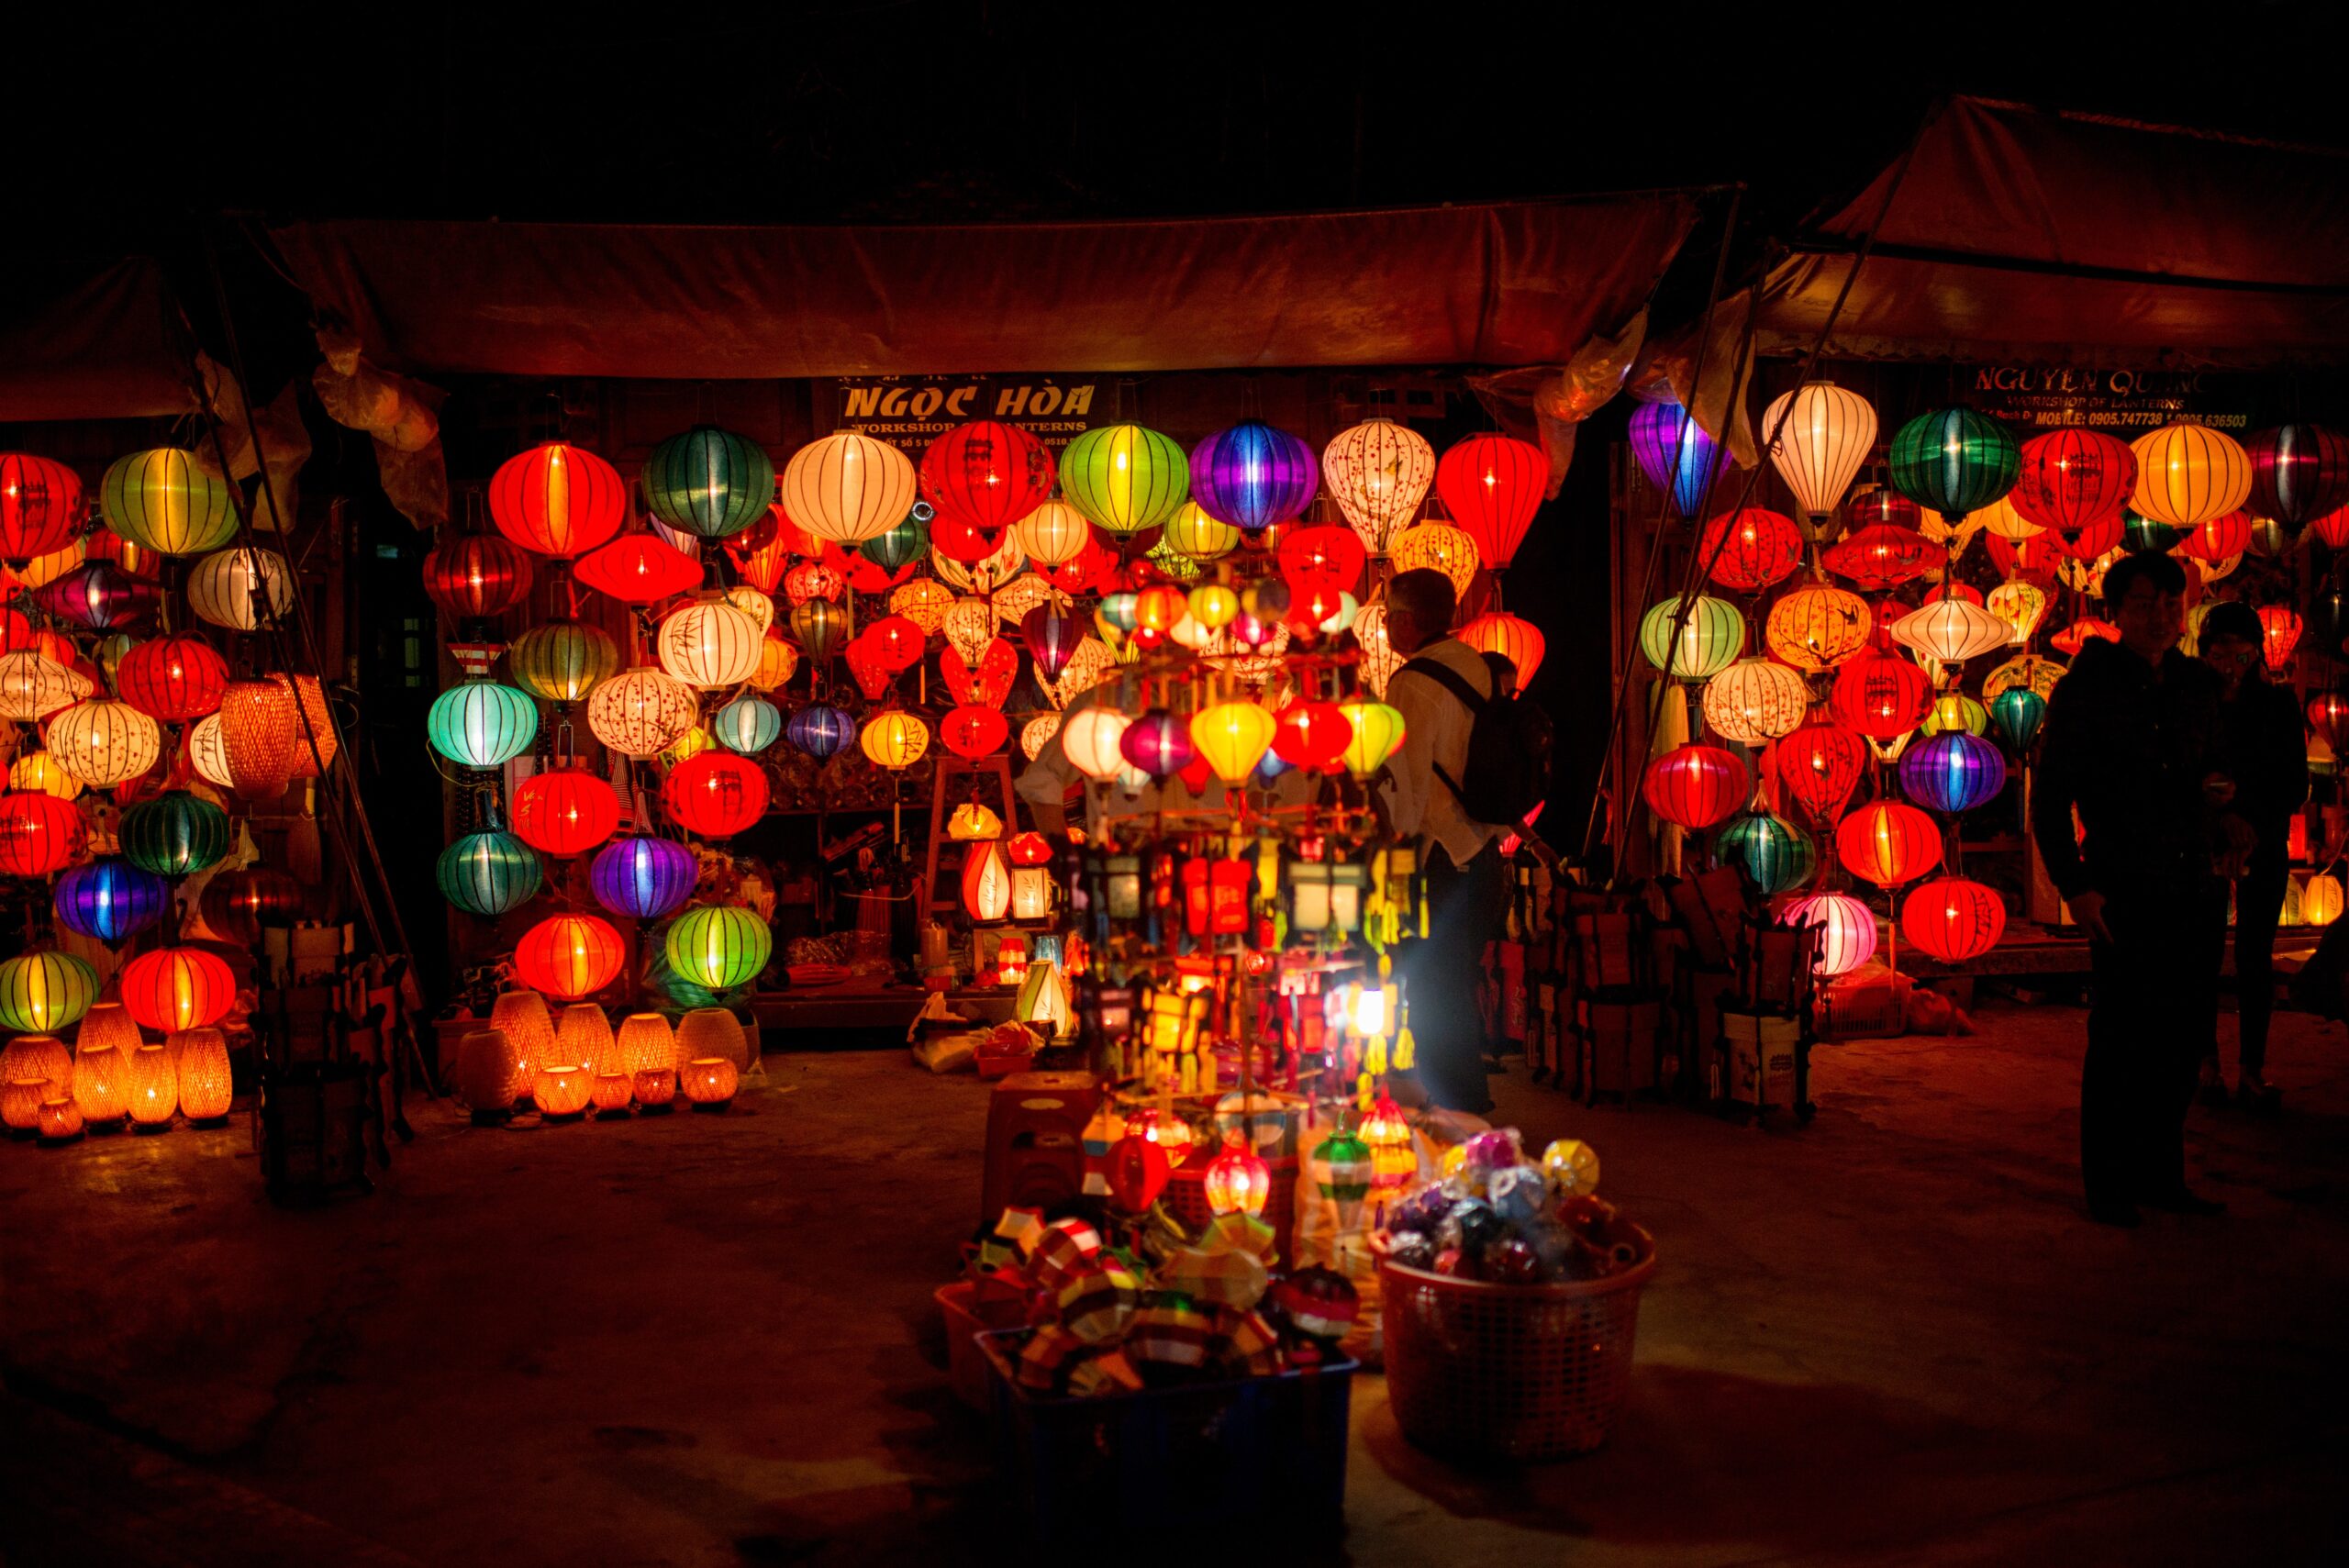 A man stoped and looks at a lantern stall at night, the whole street side is lit with hundreds of different style lanterns with many colours that set the street and surrounding aglow.